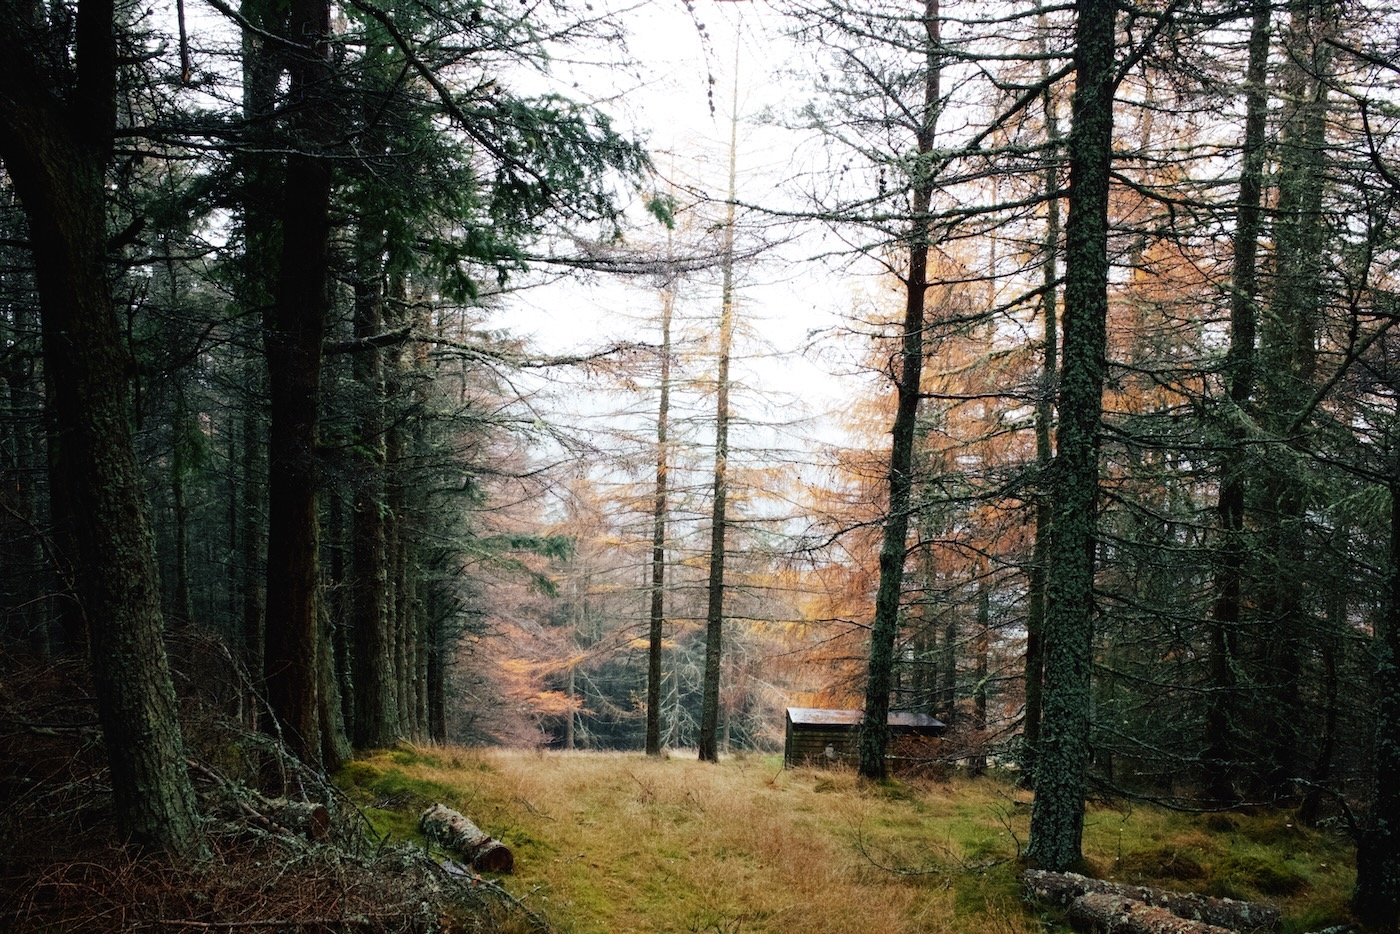 A forest cabin between pine trees